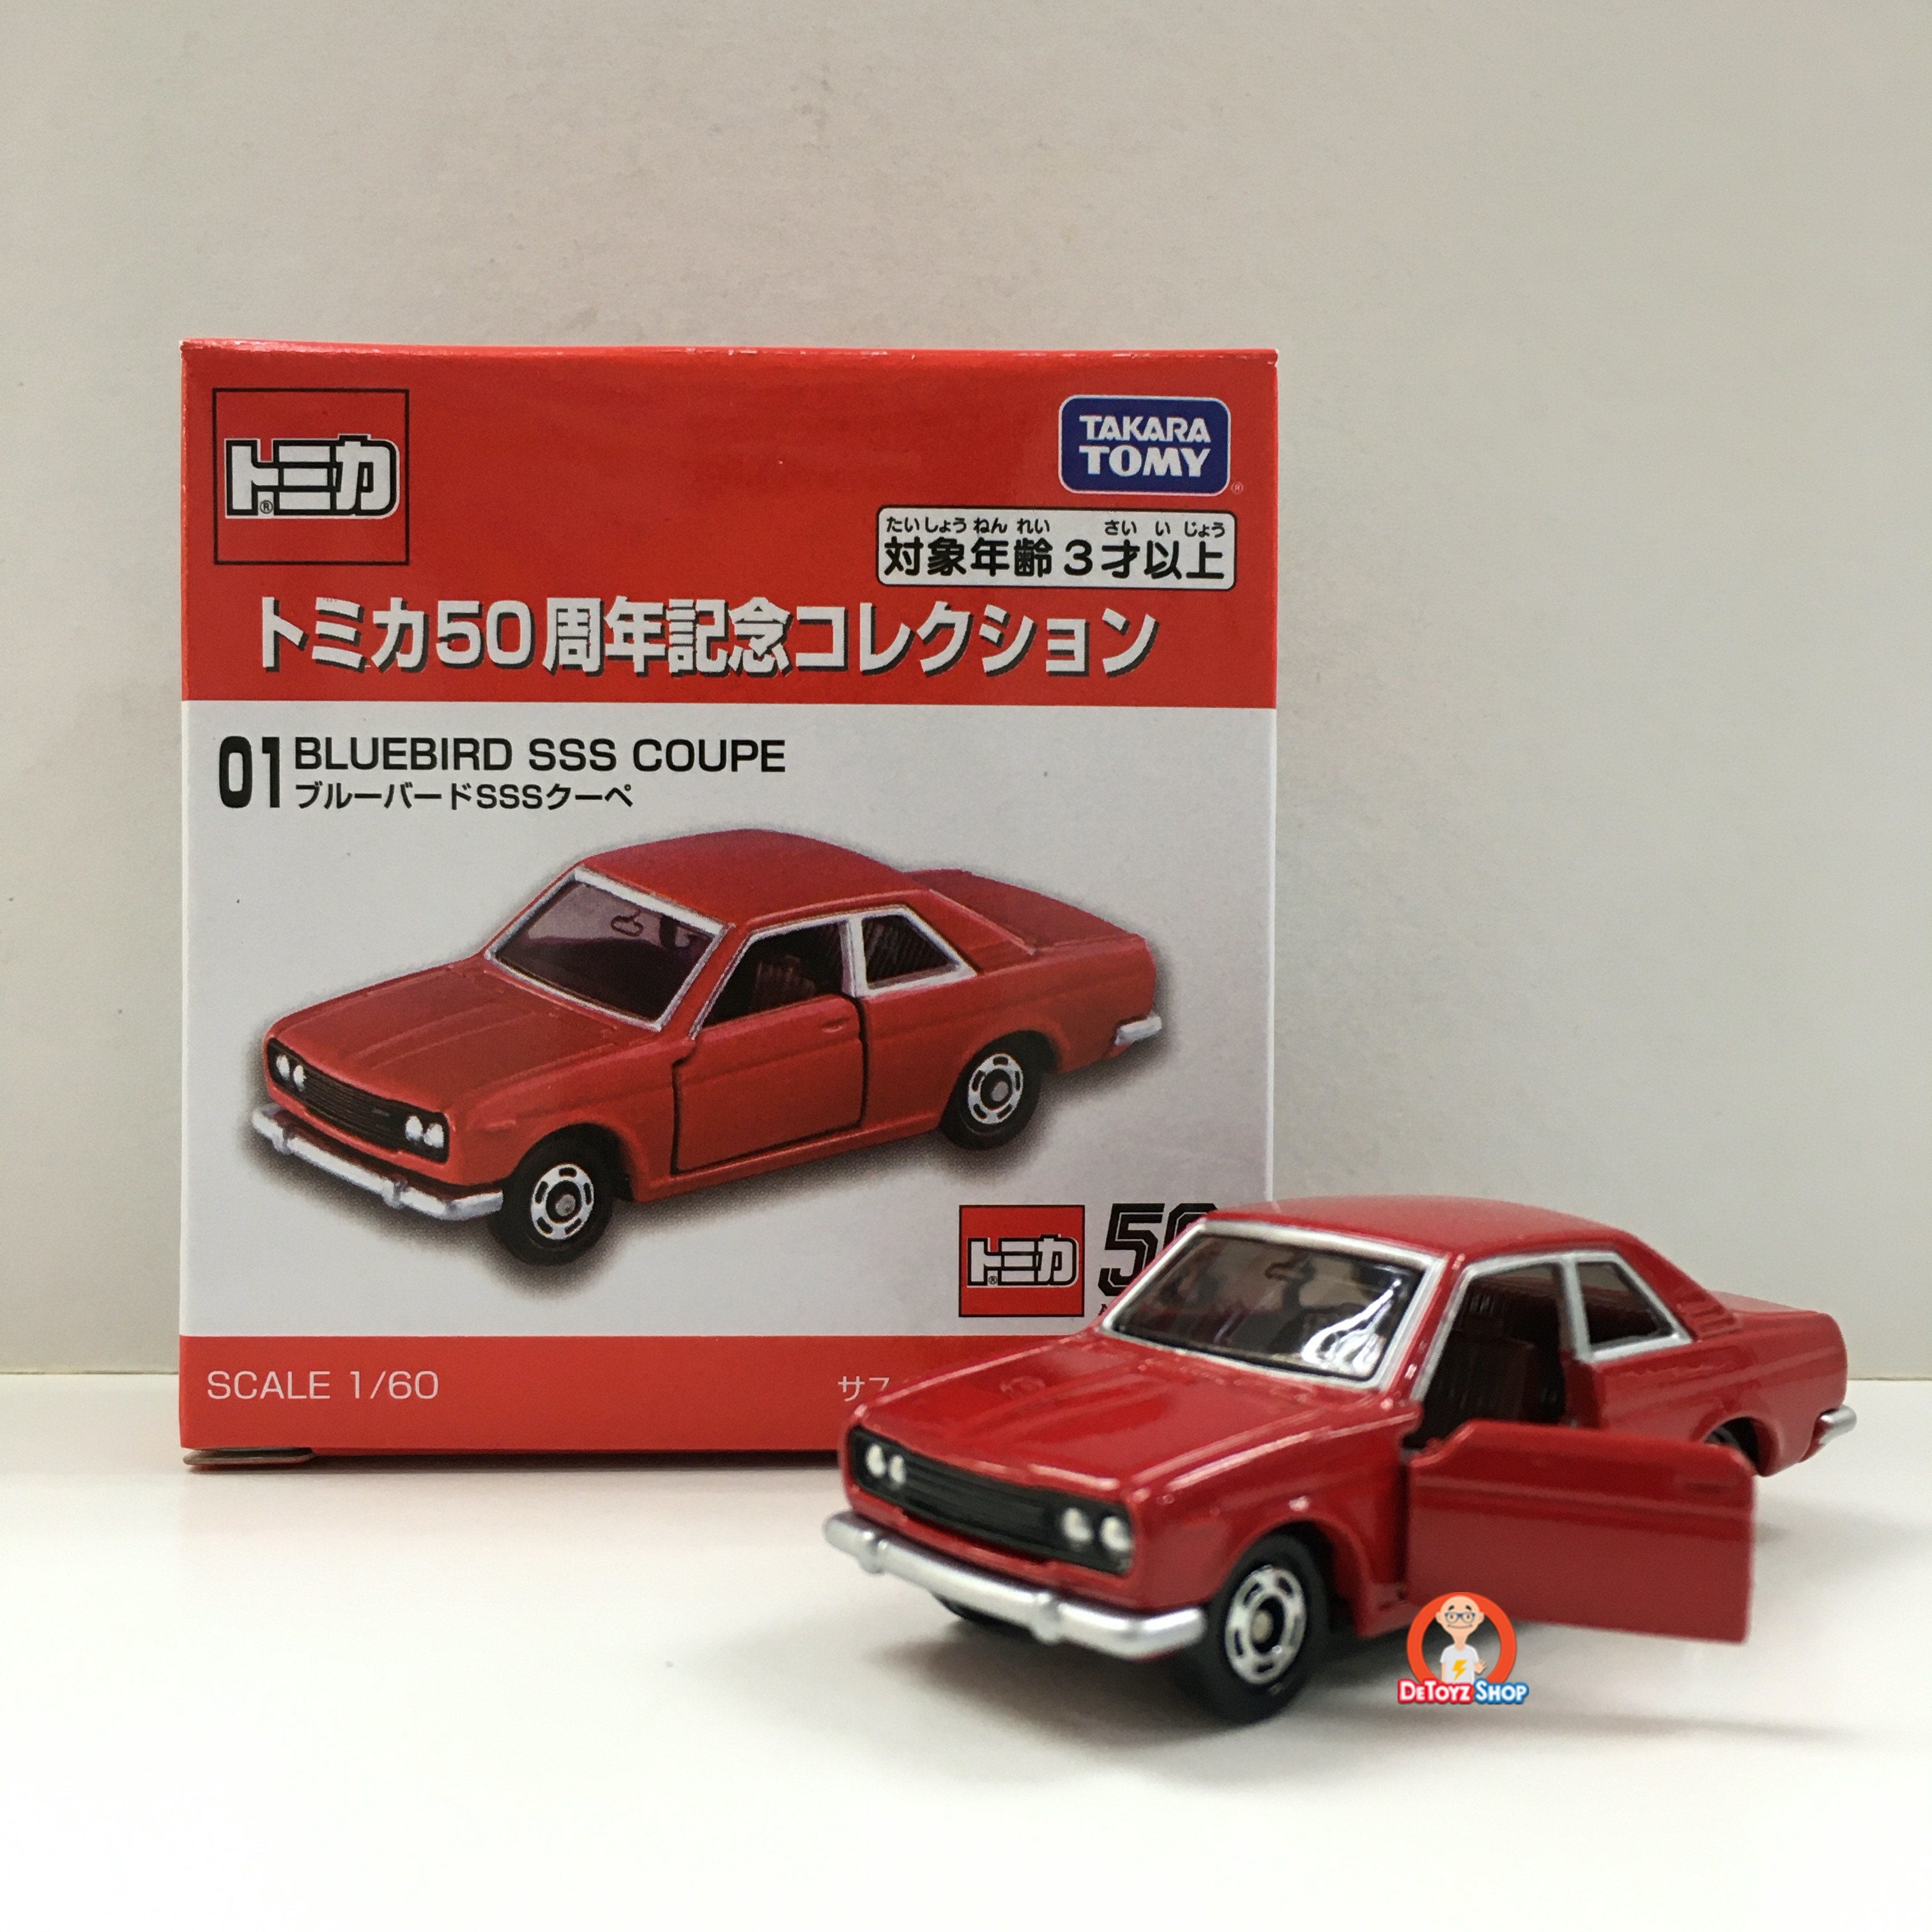 Tomica 50th Anniversary: 01 Bluebird SSS Coupe